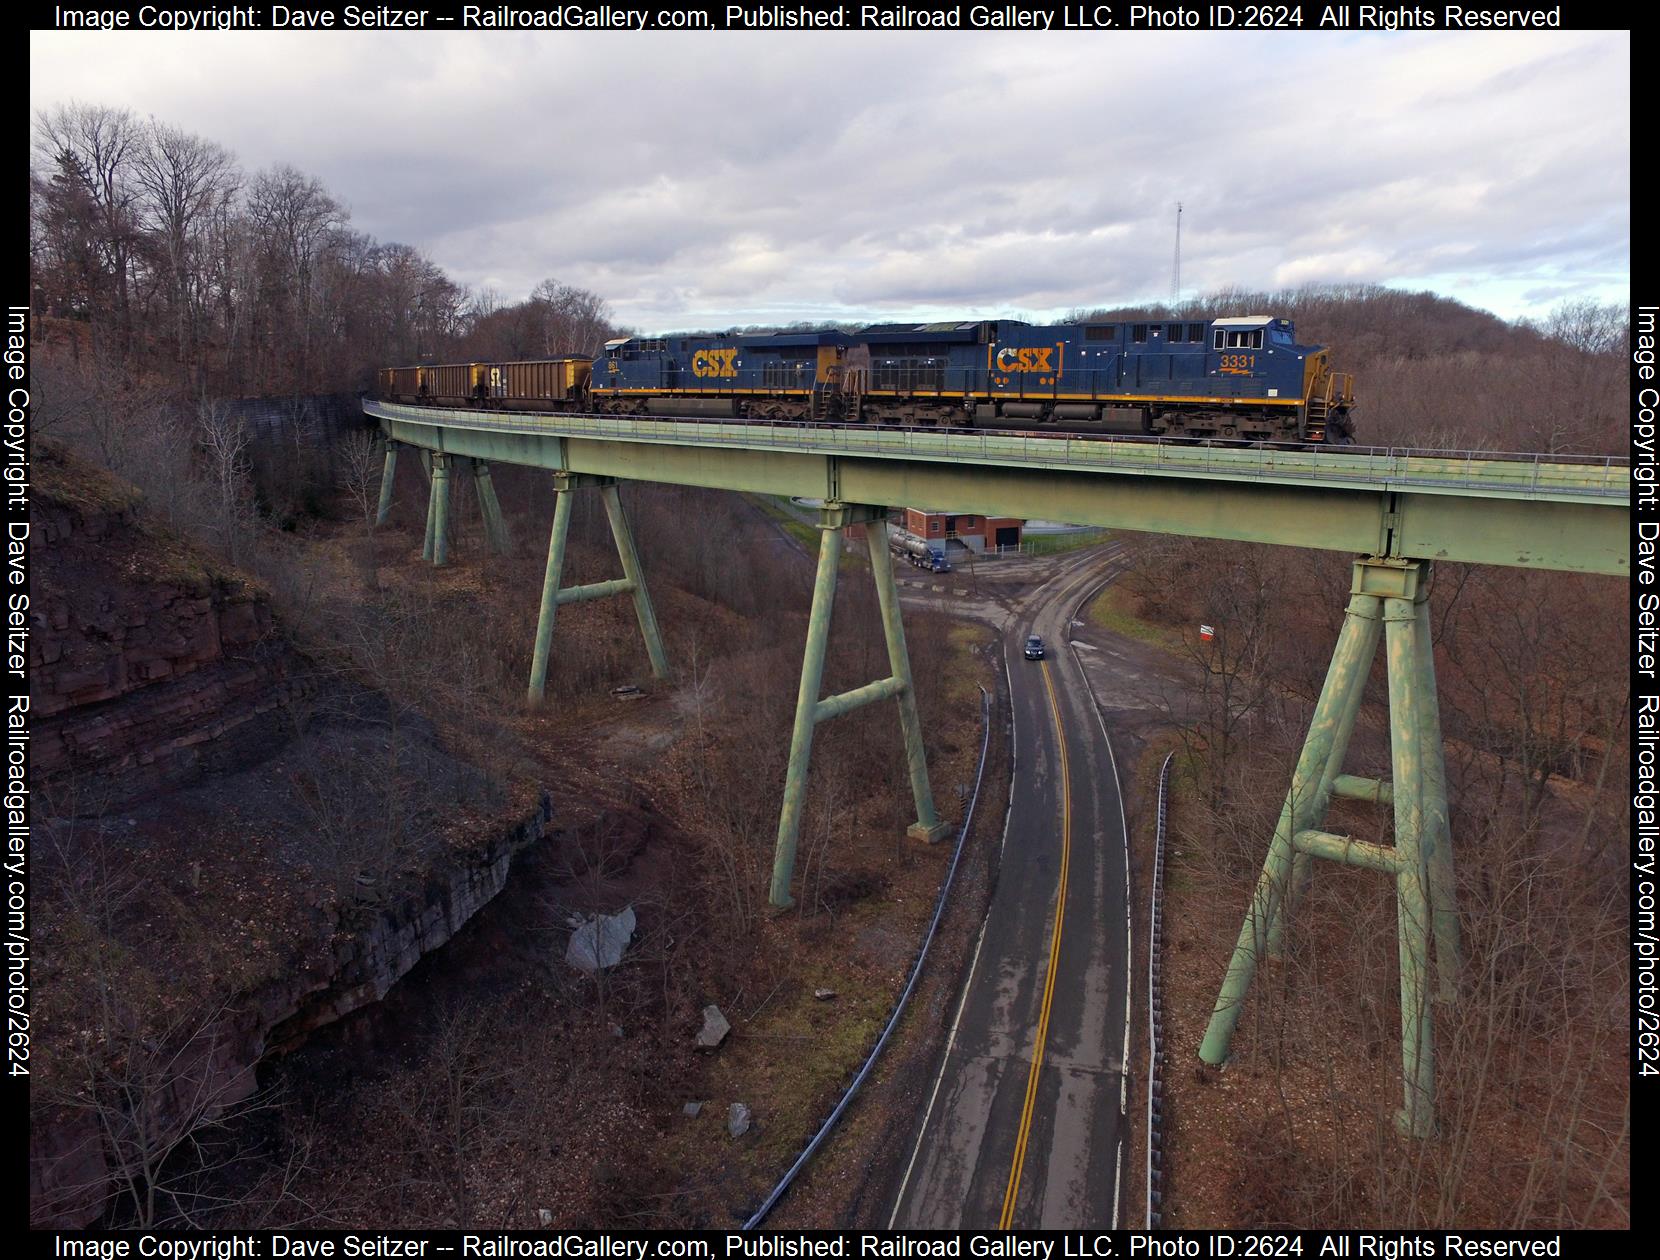 csxt 331 csx 861 is a class ET44AH ES44AH and  is pictured in Lockport, New York, United States.  This was taken along the Somerset on the Somerset Railroad. Photo Copyright: Dave Seitzer uploaded to Railroad Gallery on 12/10/2023. This photograph of csxt 331 csx 861 was taken on Sunday, January 06, 2019. All Rights Reserved. 